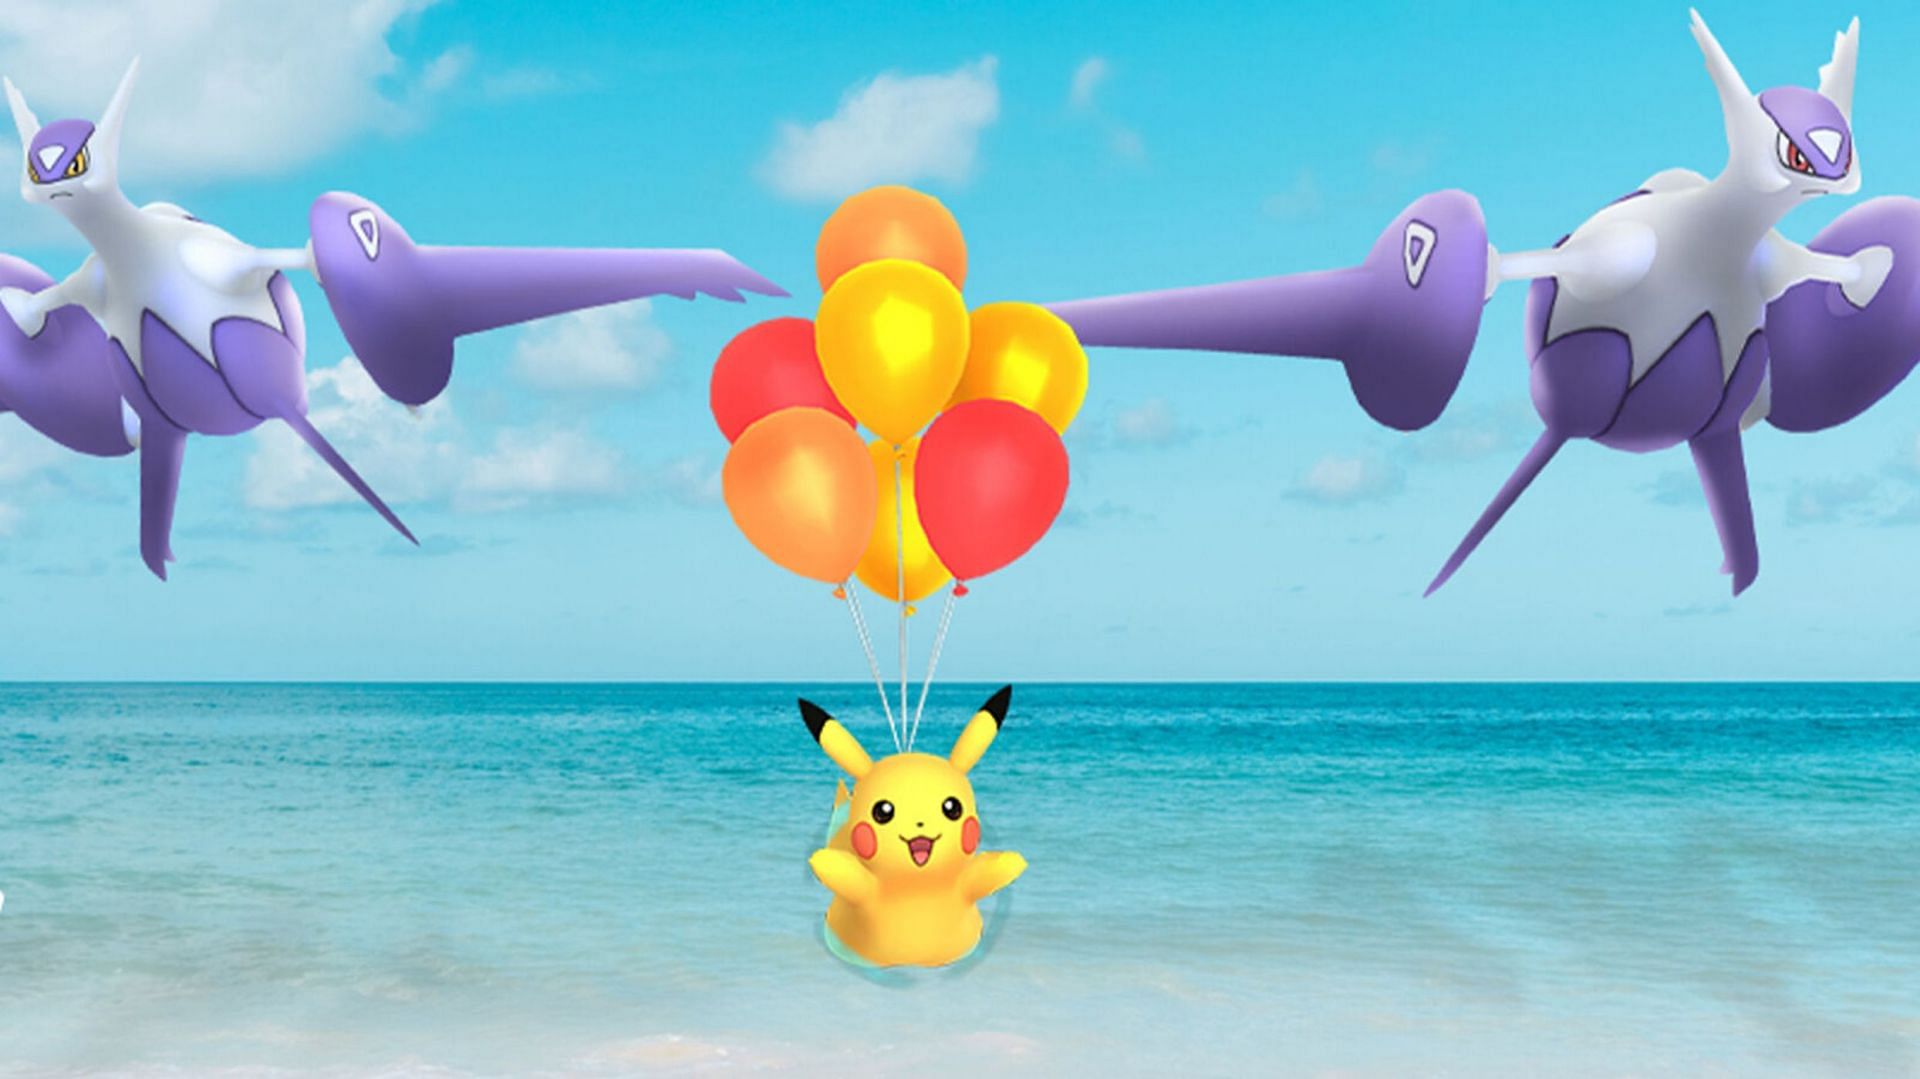 Flying Pikachu arrives in Pokemon GO once again to celebrate the debut of Mega Latios and Latias (Image via Niantic)